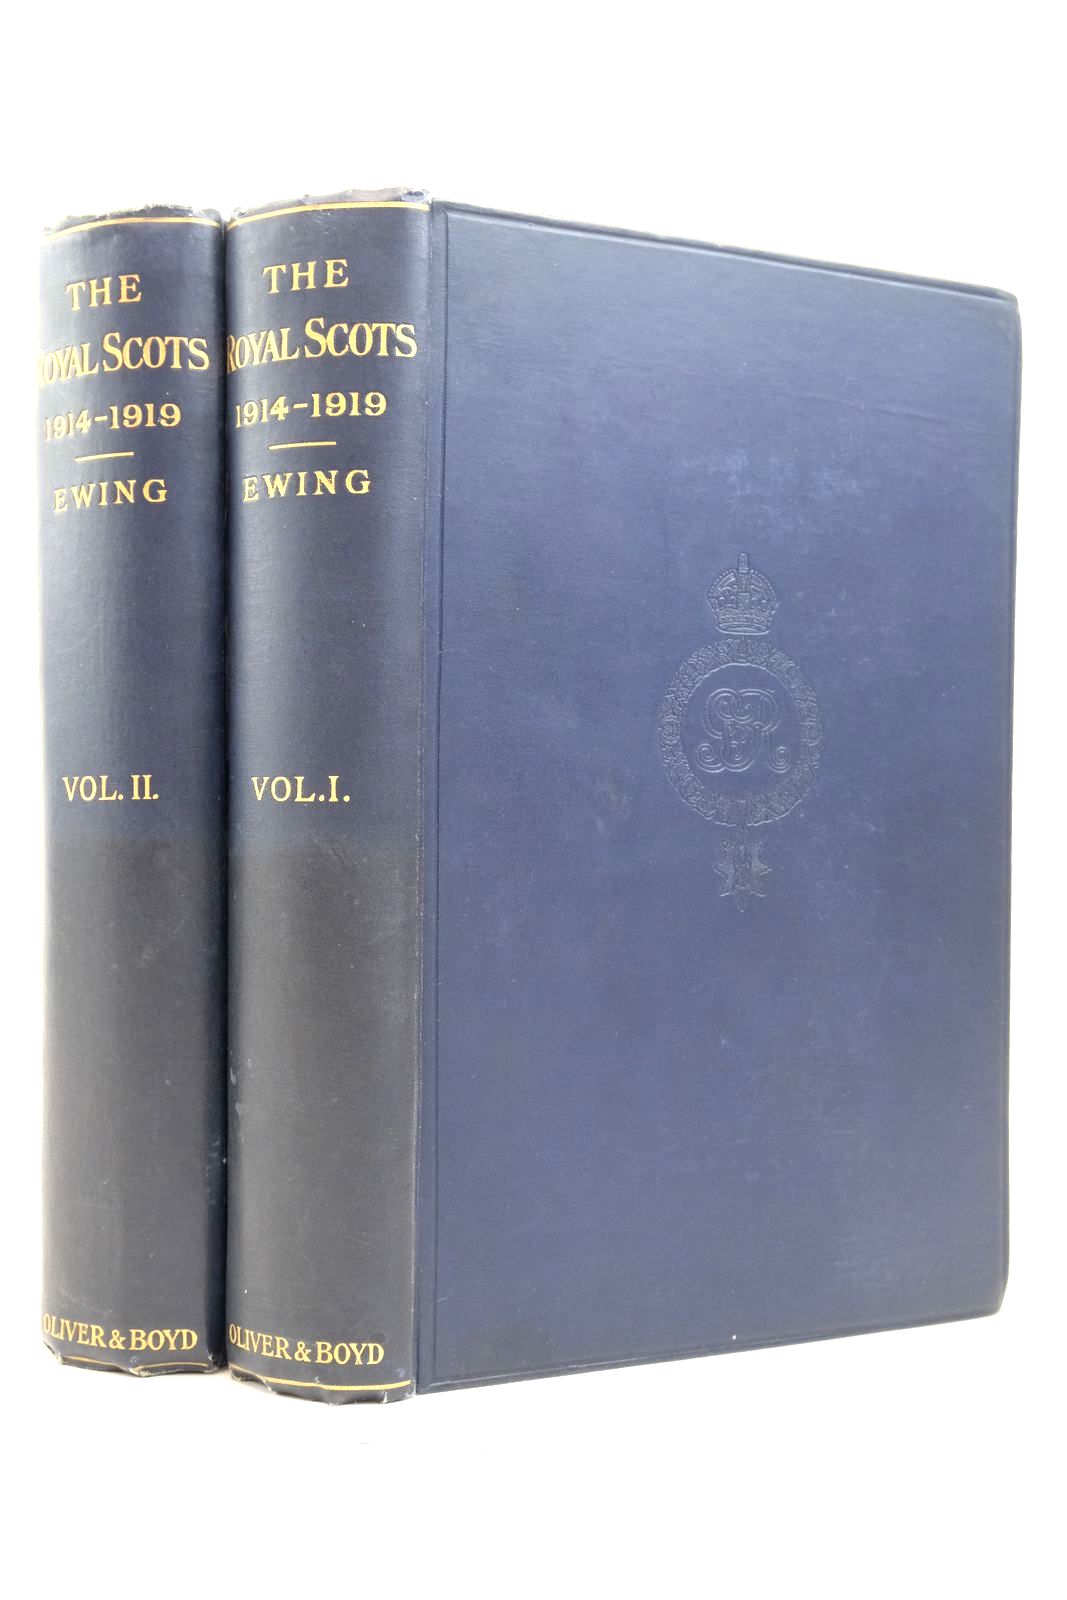 Photo of THE ROYAL SCOTS 1914-1919 (2 VOLUMES) written by Ewing, John published by Oliver &amp; Boyd (STOCK CODE: 2137551)  for sale by Stella & Rose's Books